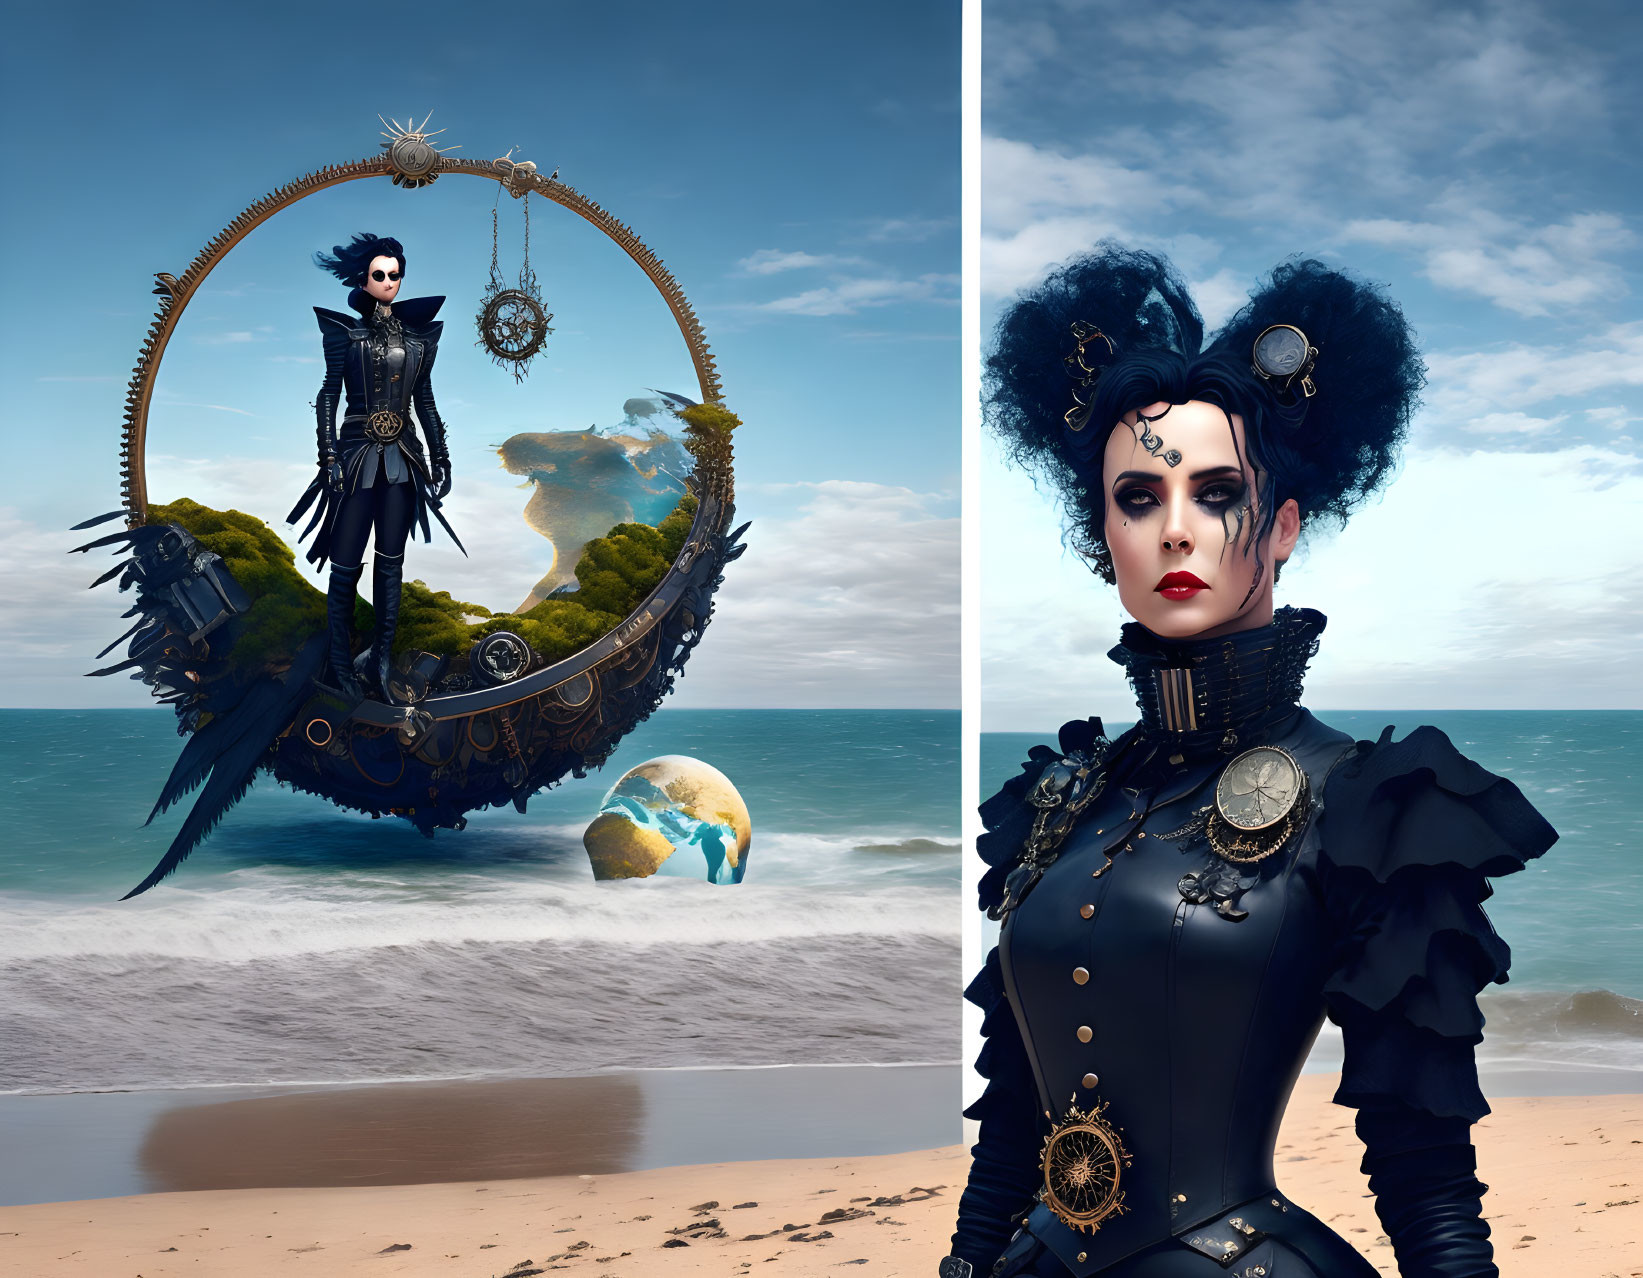 Steampunk-inspired portrait with mechanical elements on a beach.